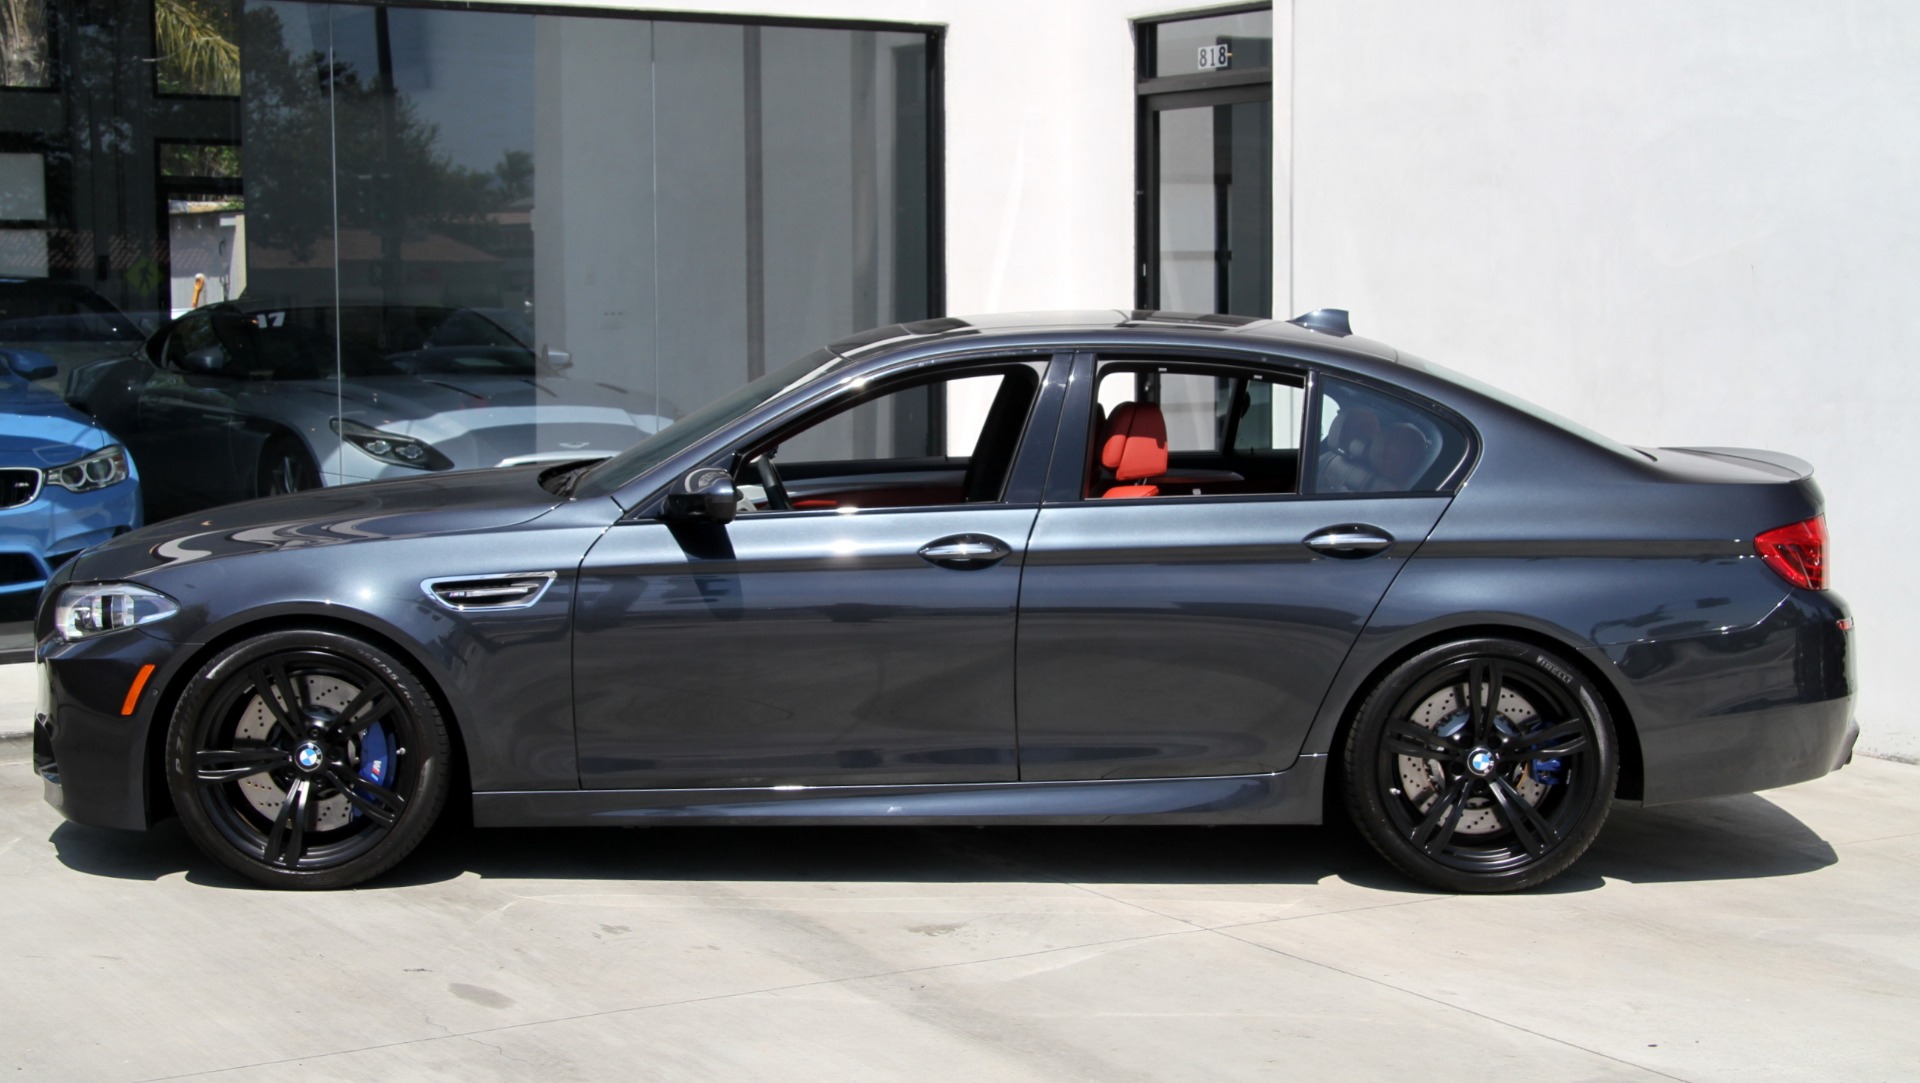 2016 BMW M5 *** COMPETITION PACKAGE *** Stock # 6246 for sale near Redondo Beach, CA BMW Dealer